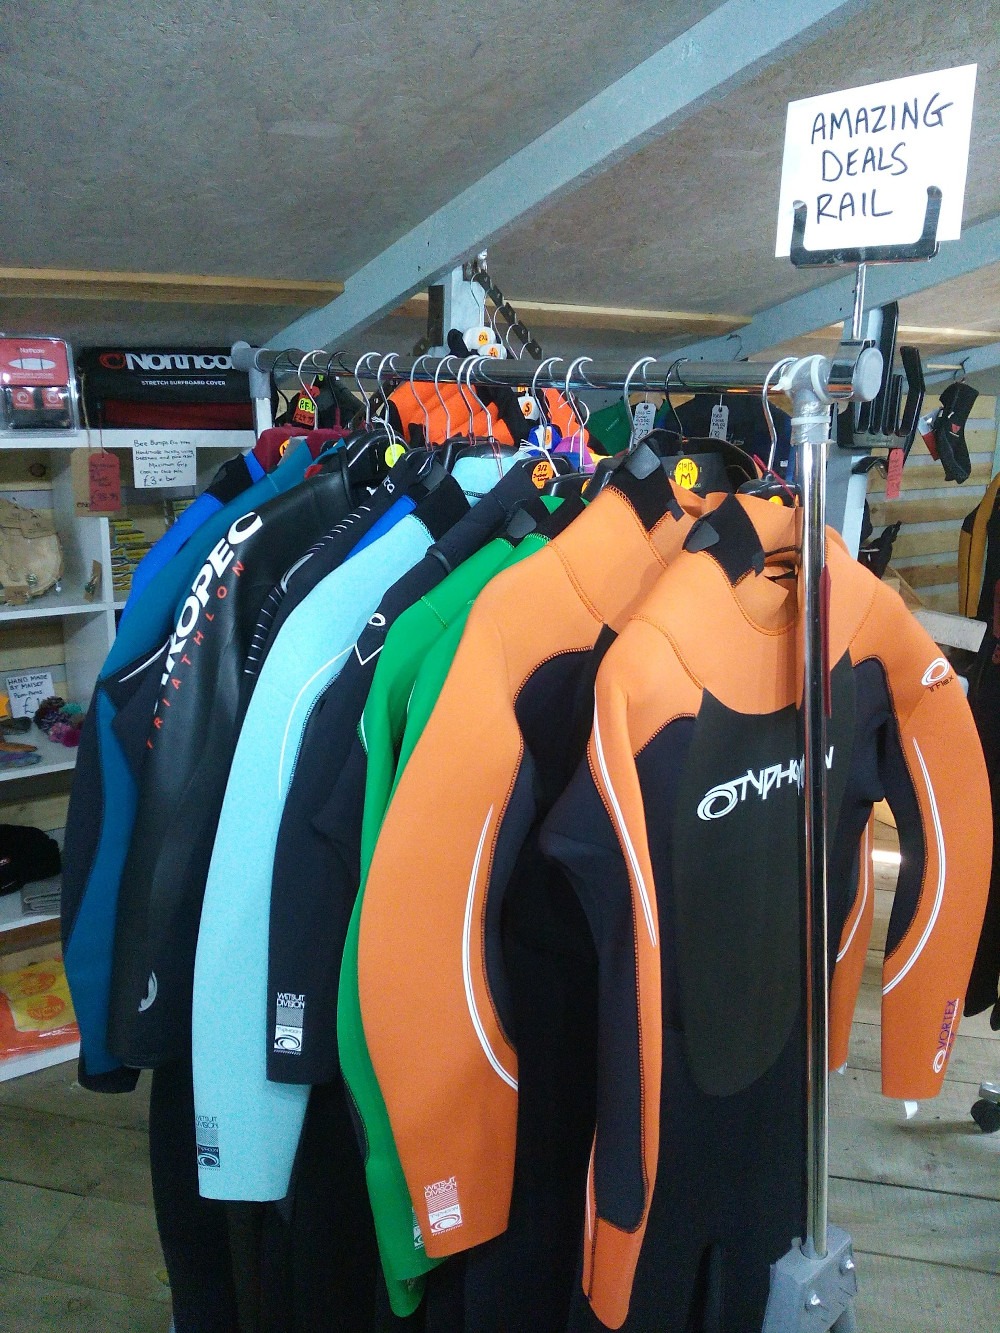 Compliment Martelaar Occlusie Amazing Bargains Rail - full winter suits from as little as £89.95 - North  Coast Wetsuits - NCW